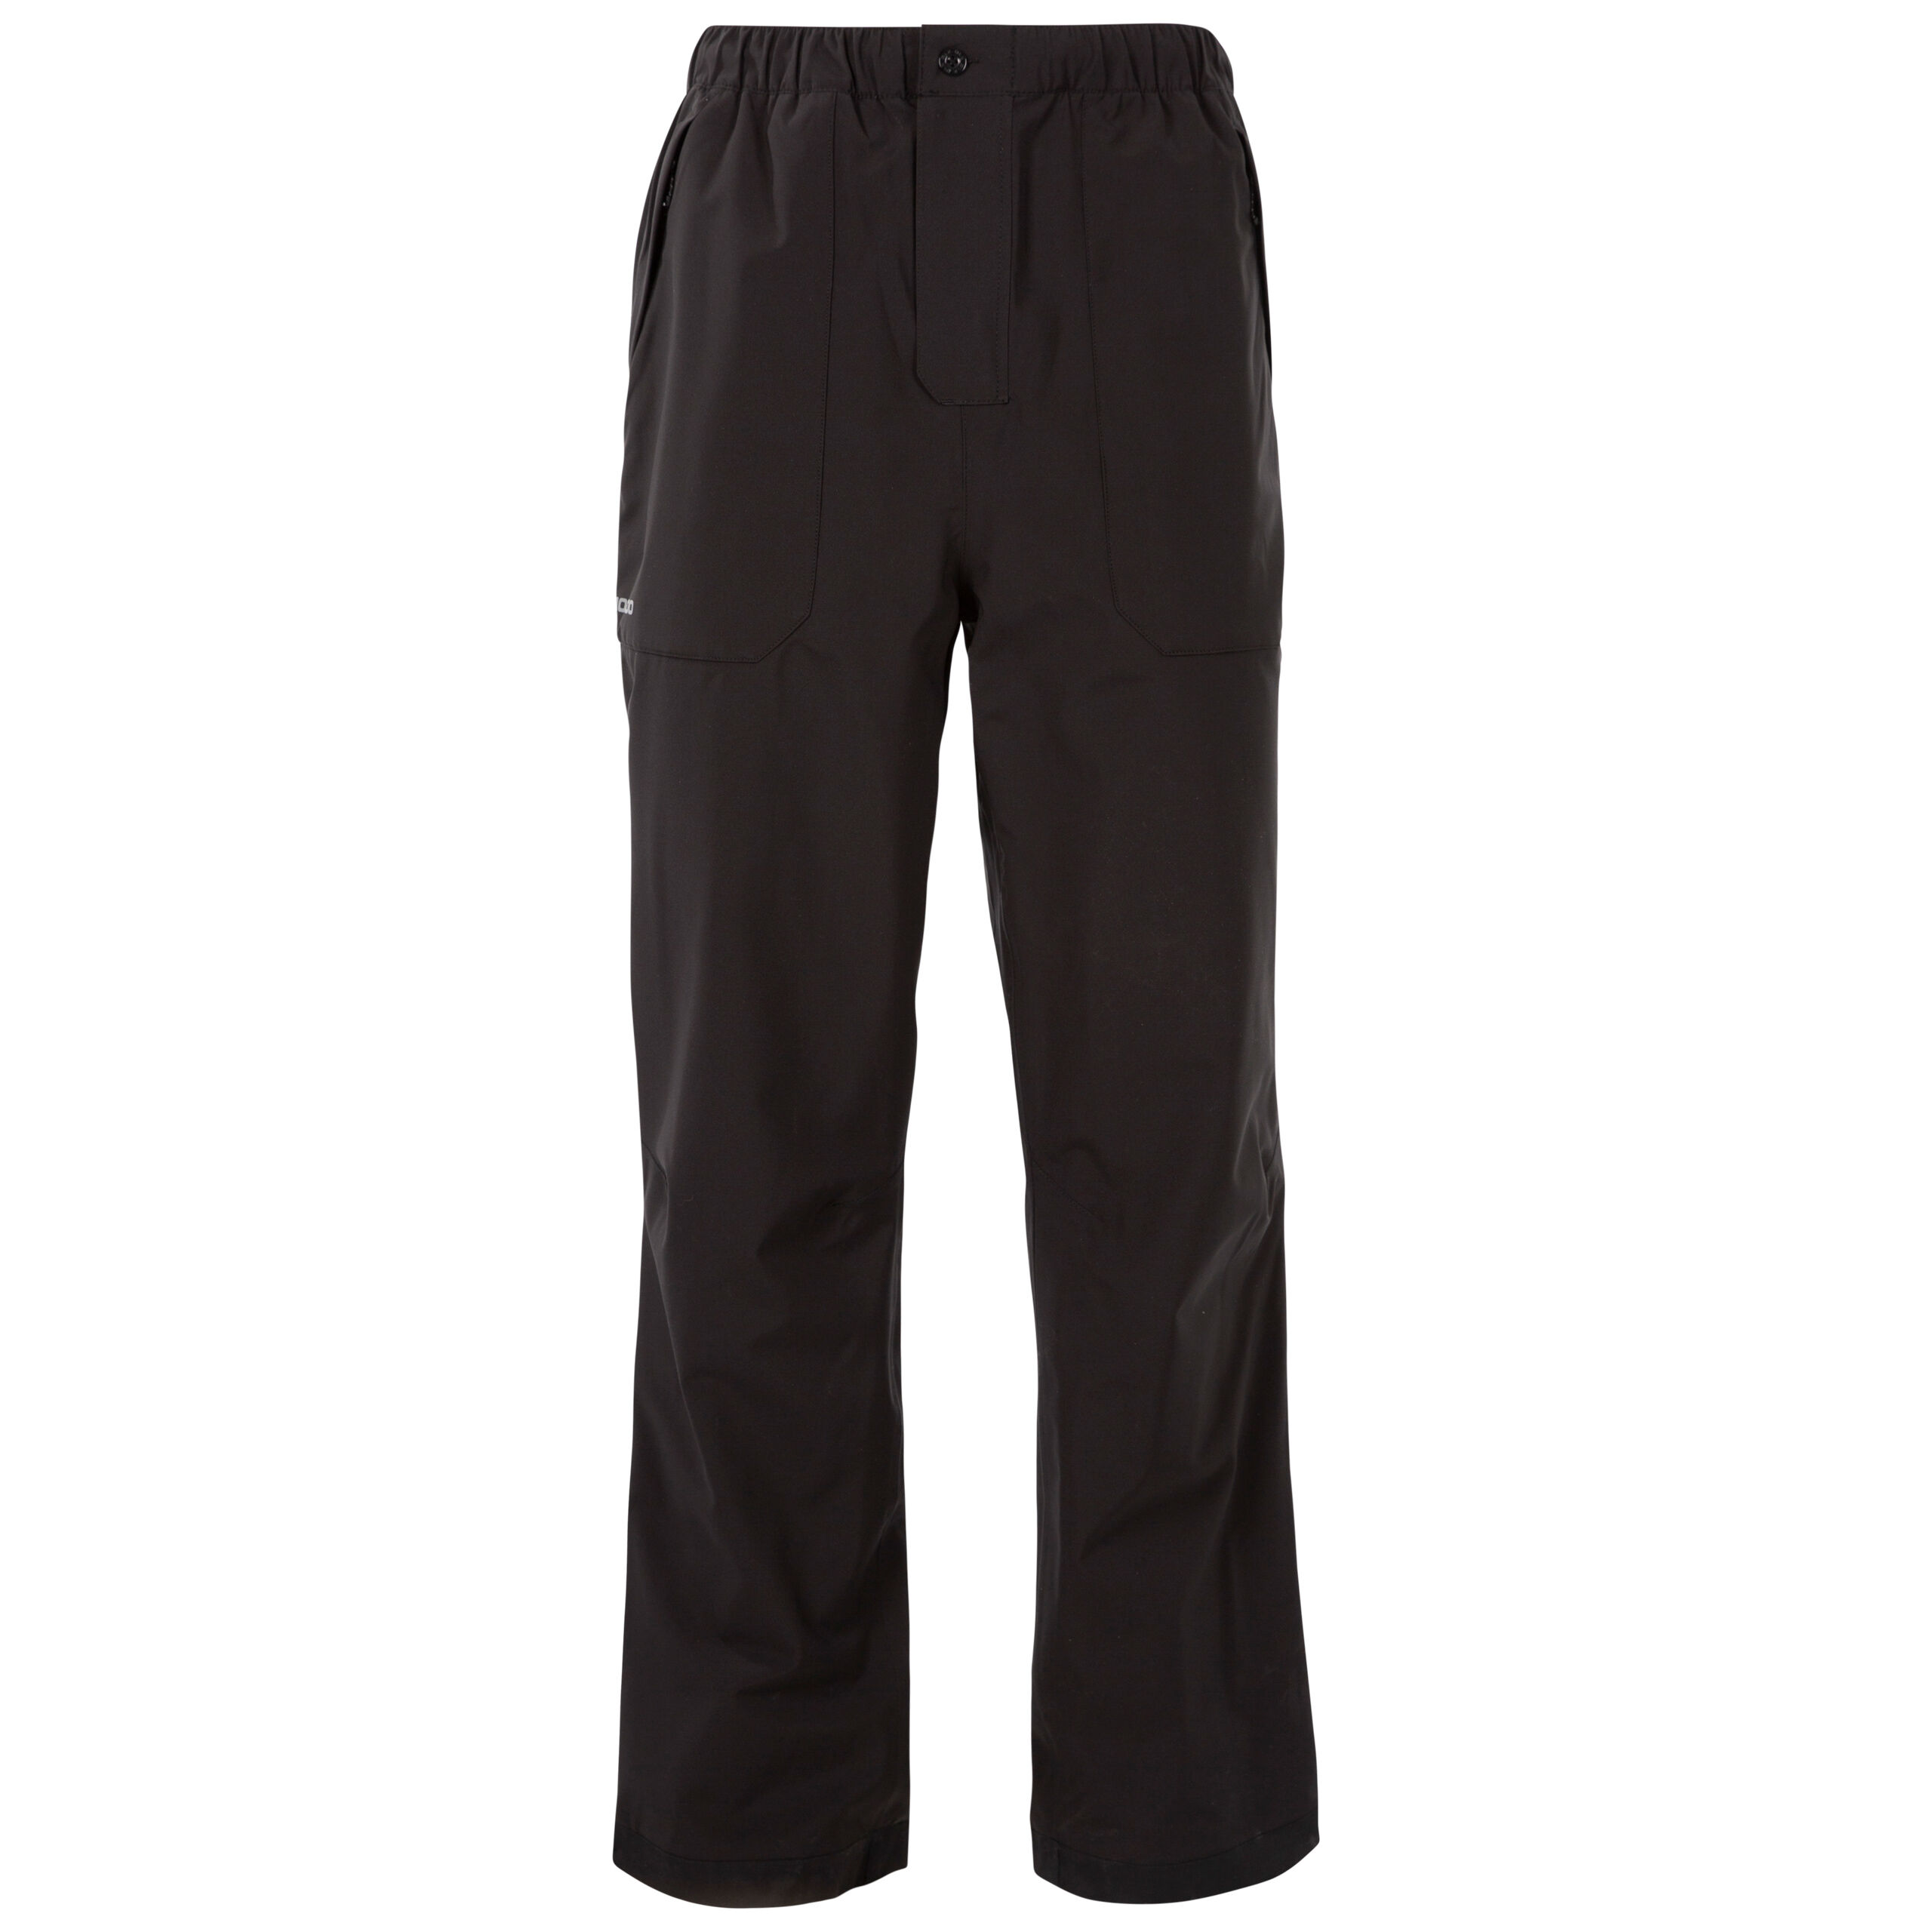 DLX Mens Walking Trousers Cargo Pant Hiking Putter